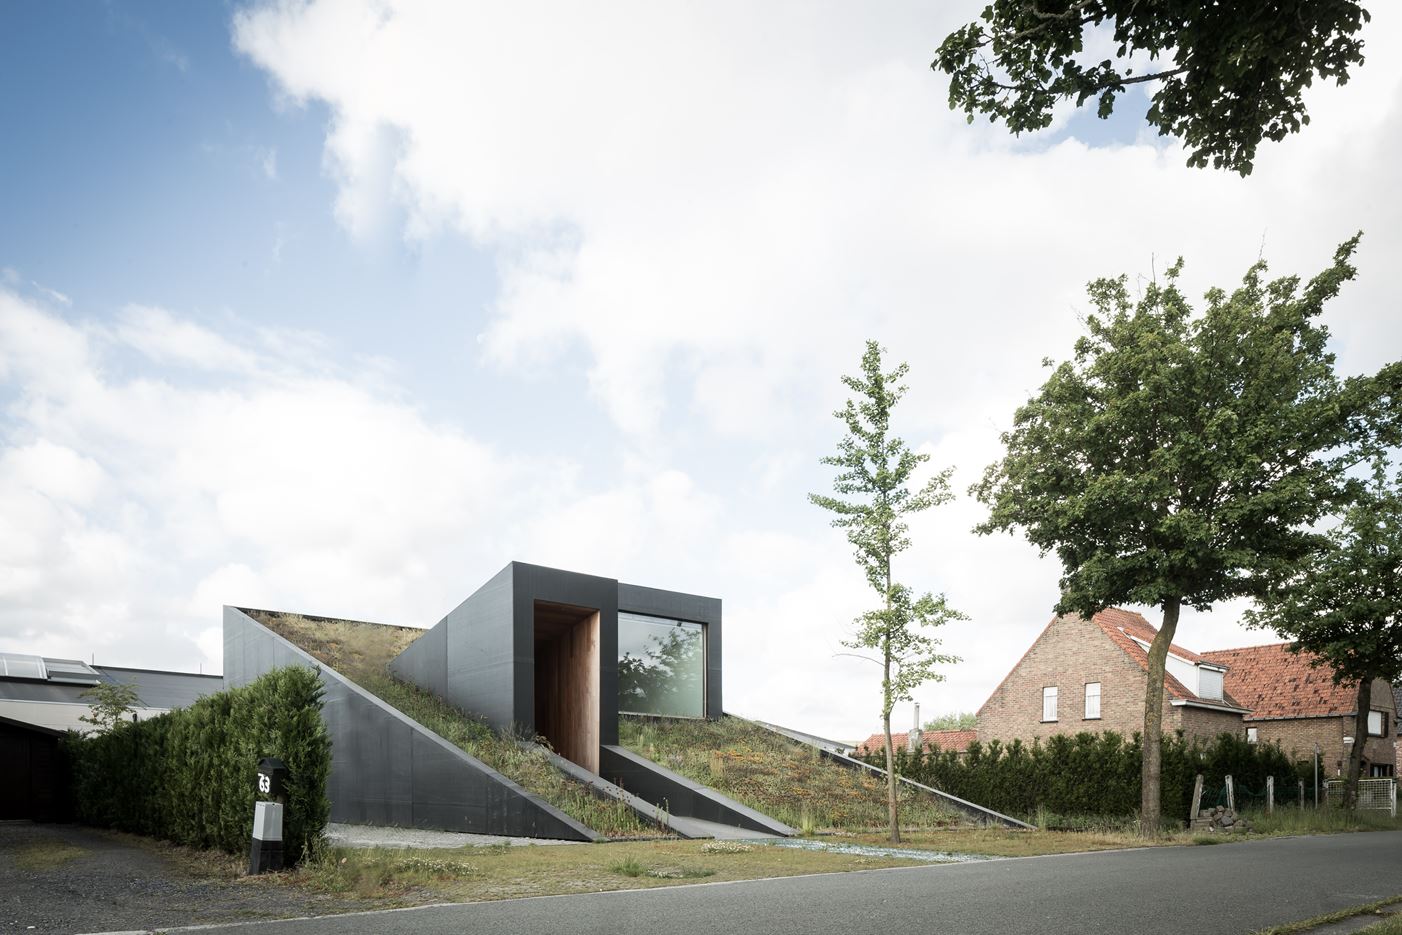 House PIBO in Gent, Belgium by OYO